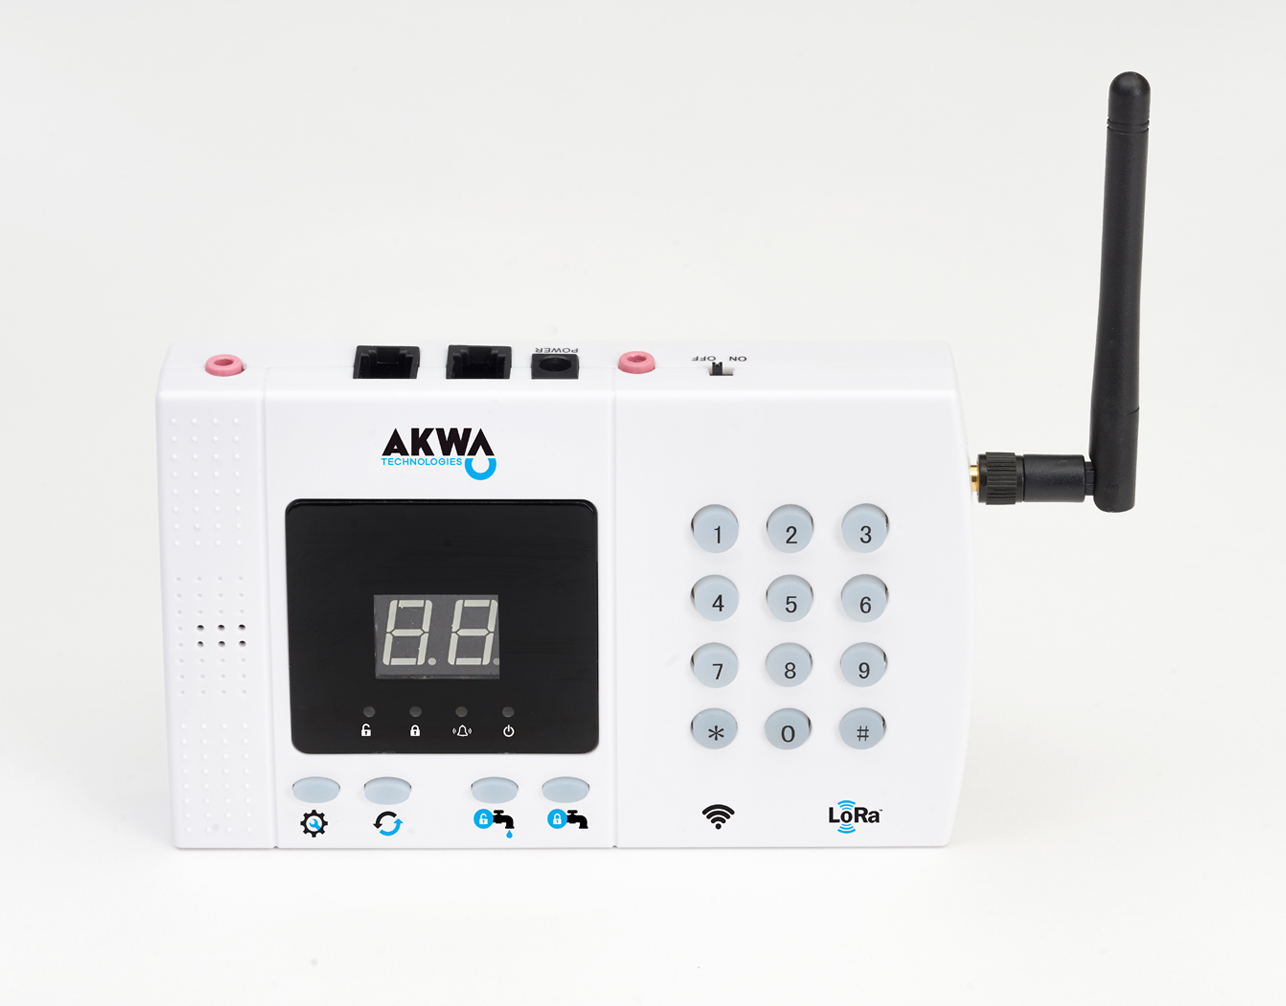 The AKWA Water Alarm controller is the main component of the AKWA Technologies system